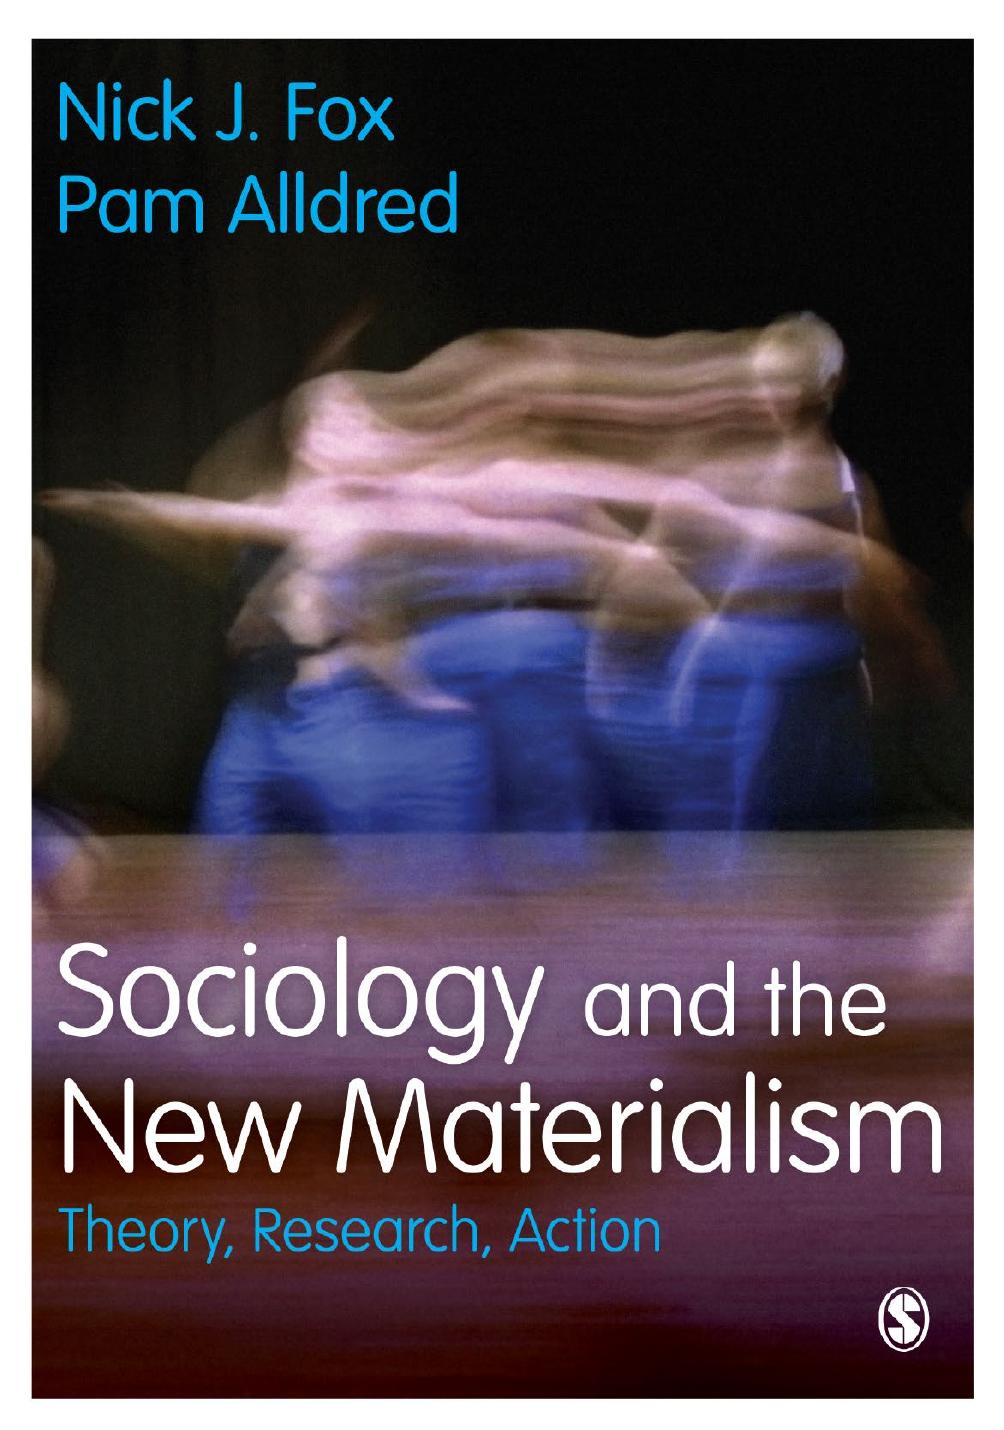 Sociology and the New Materialism